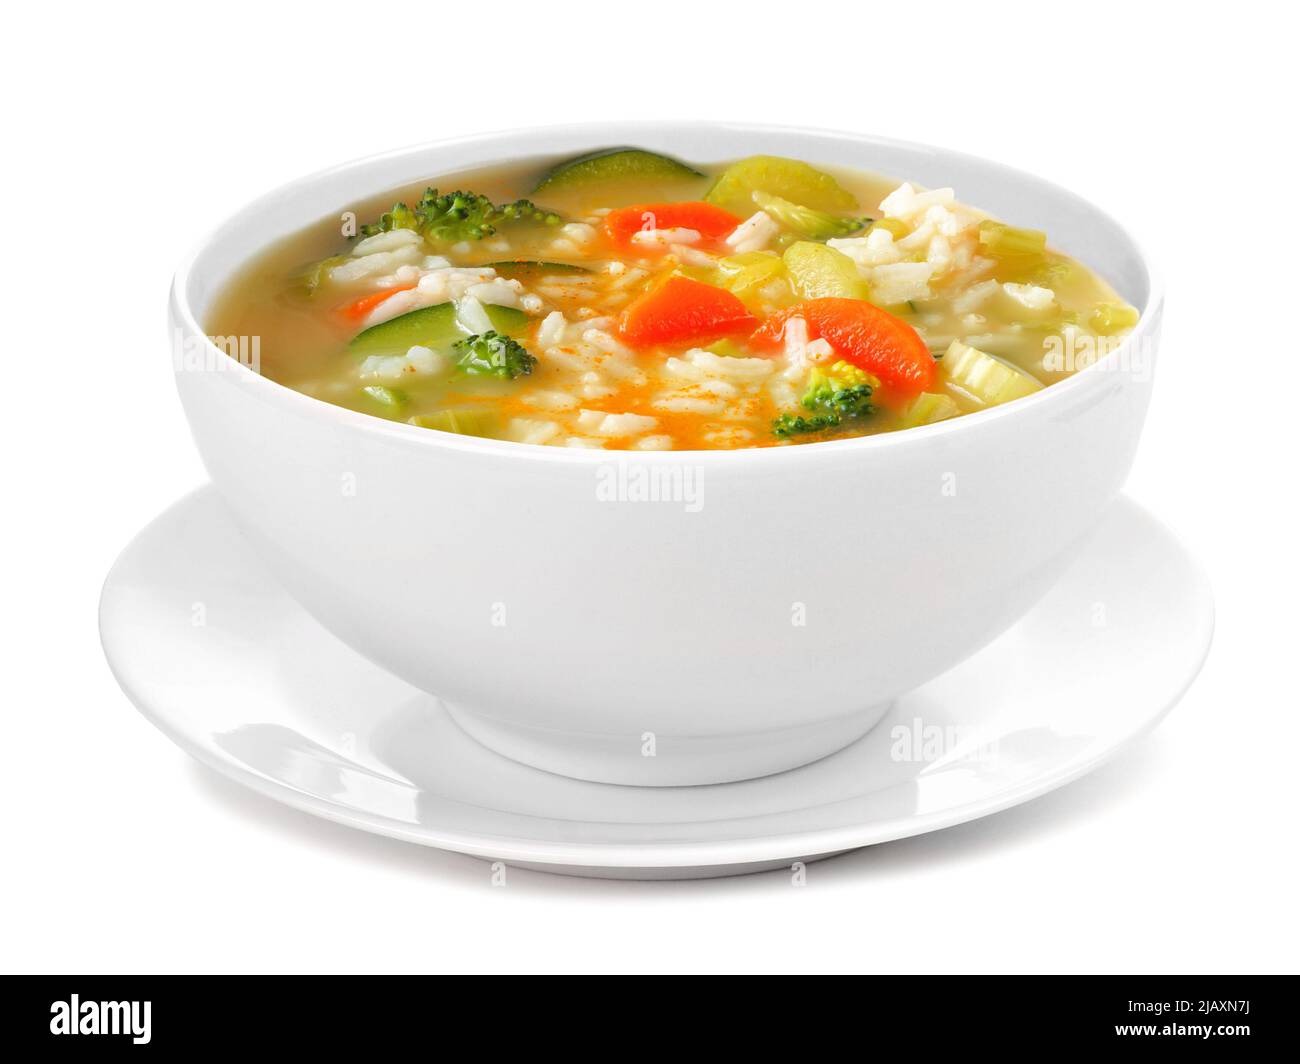 Healthy vegetable soup with rice in a white bowl with saucer. Side view isolated on a white background. Stock Photo